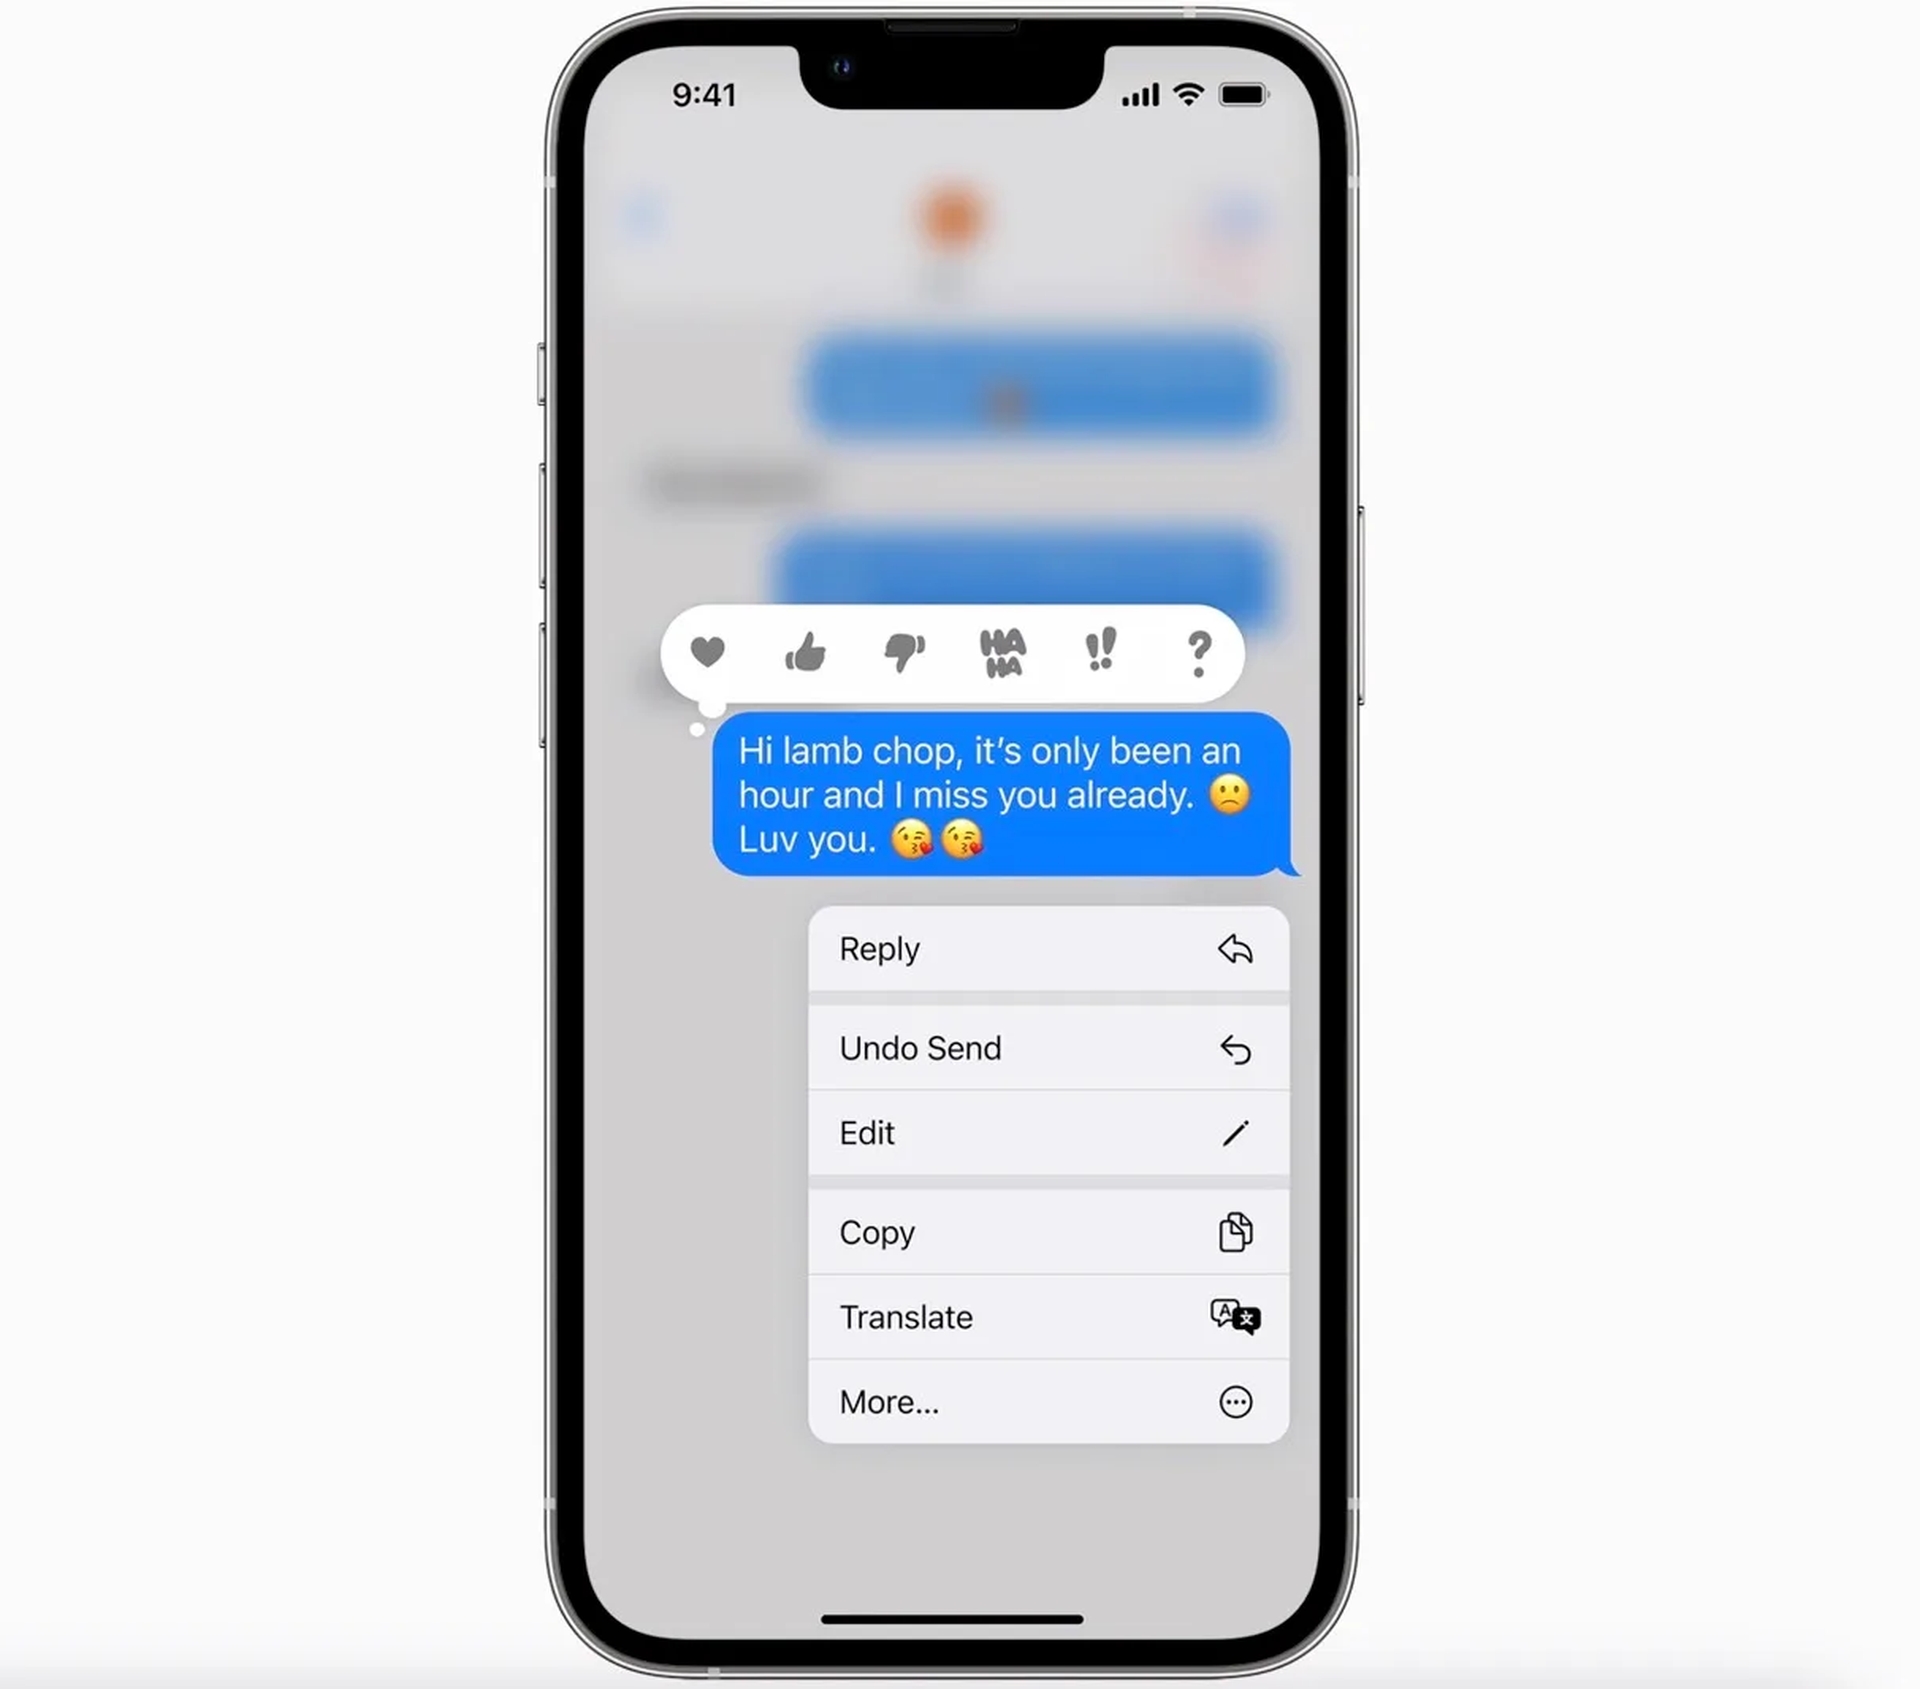 In this article, we are going to take a look at how to unsend iMessage iOS 16, so you can do so as soon as it rolls out.